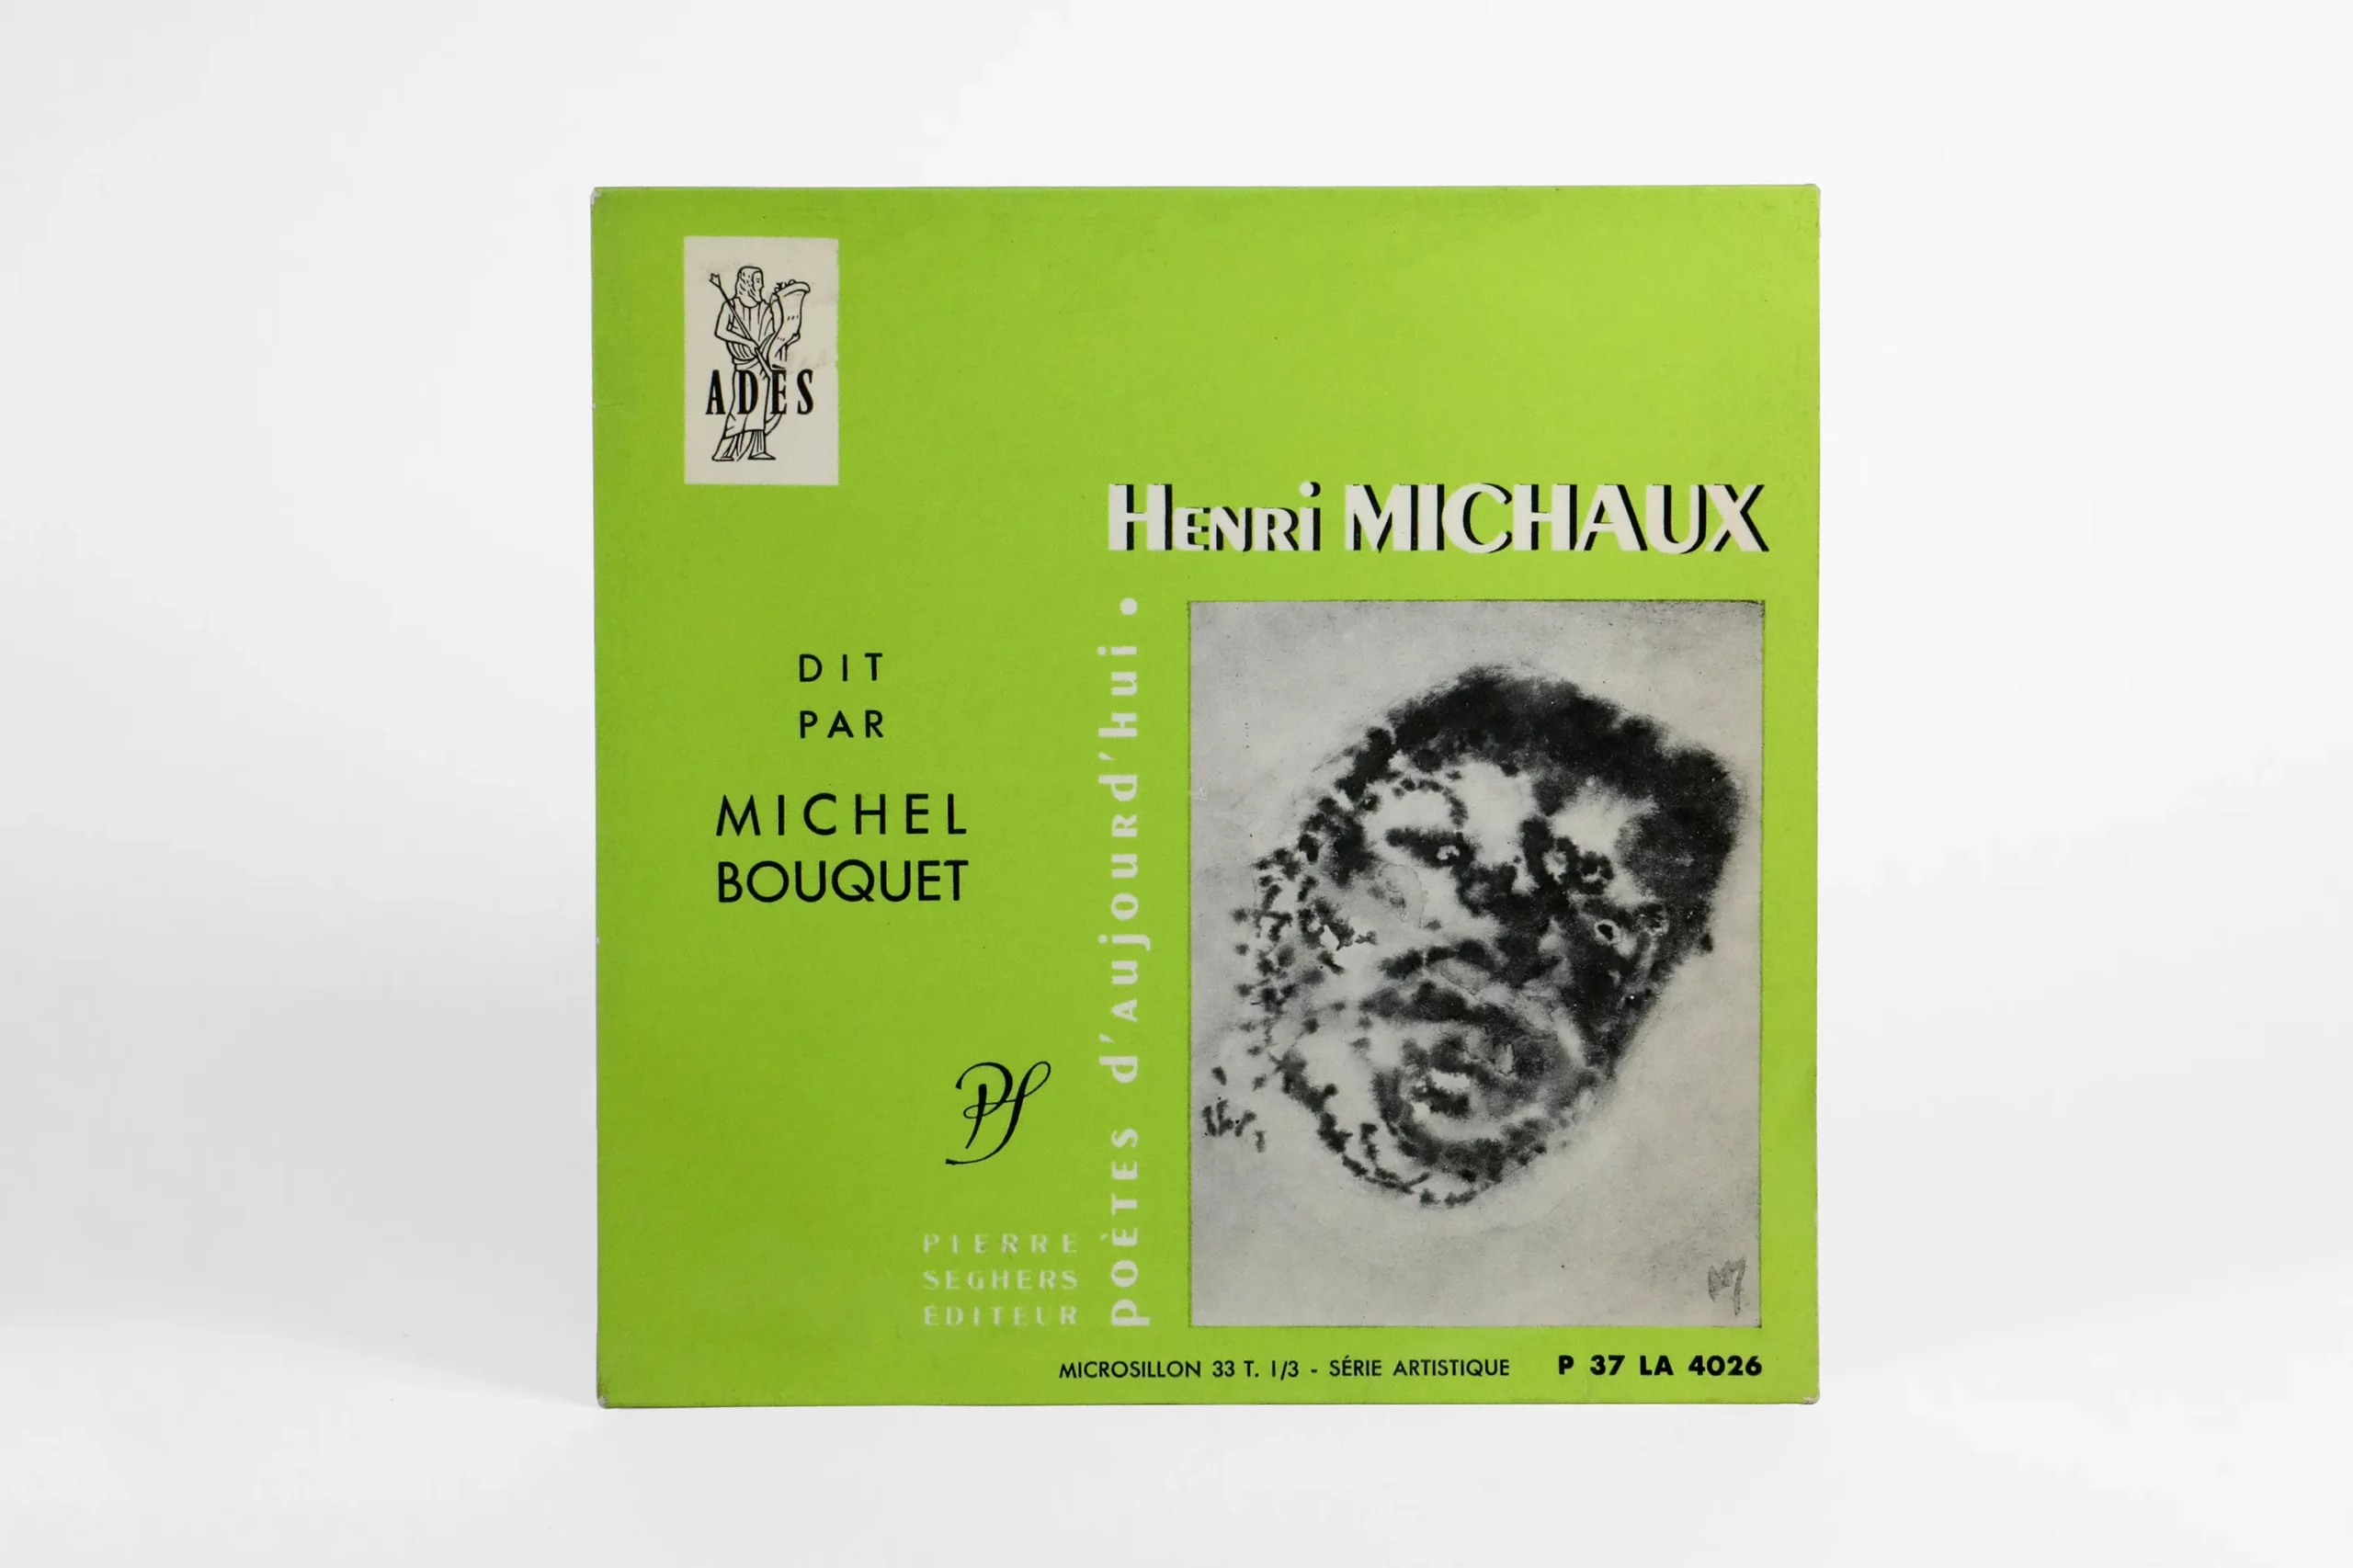 Cannabis and artists. Henri Michaux, a renowned artist and writer, experimented with cannabis to create works of art.